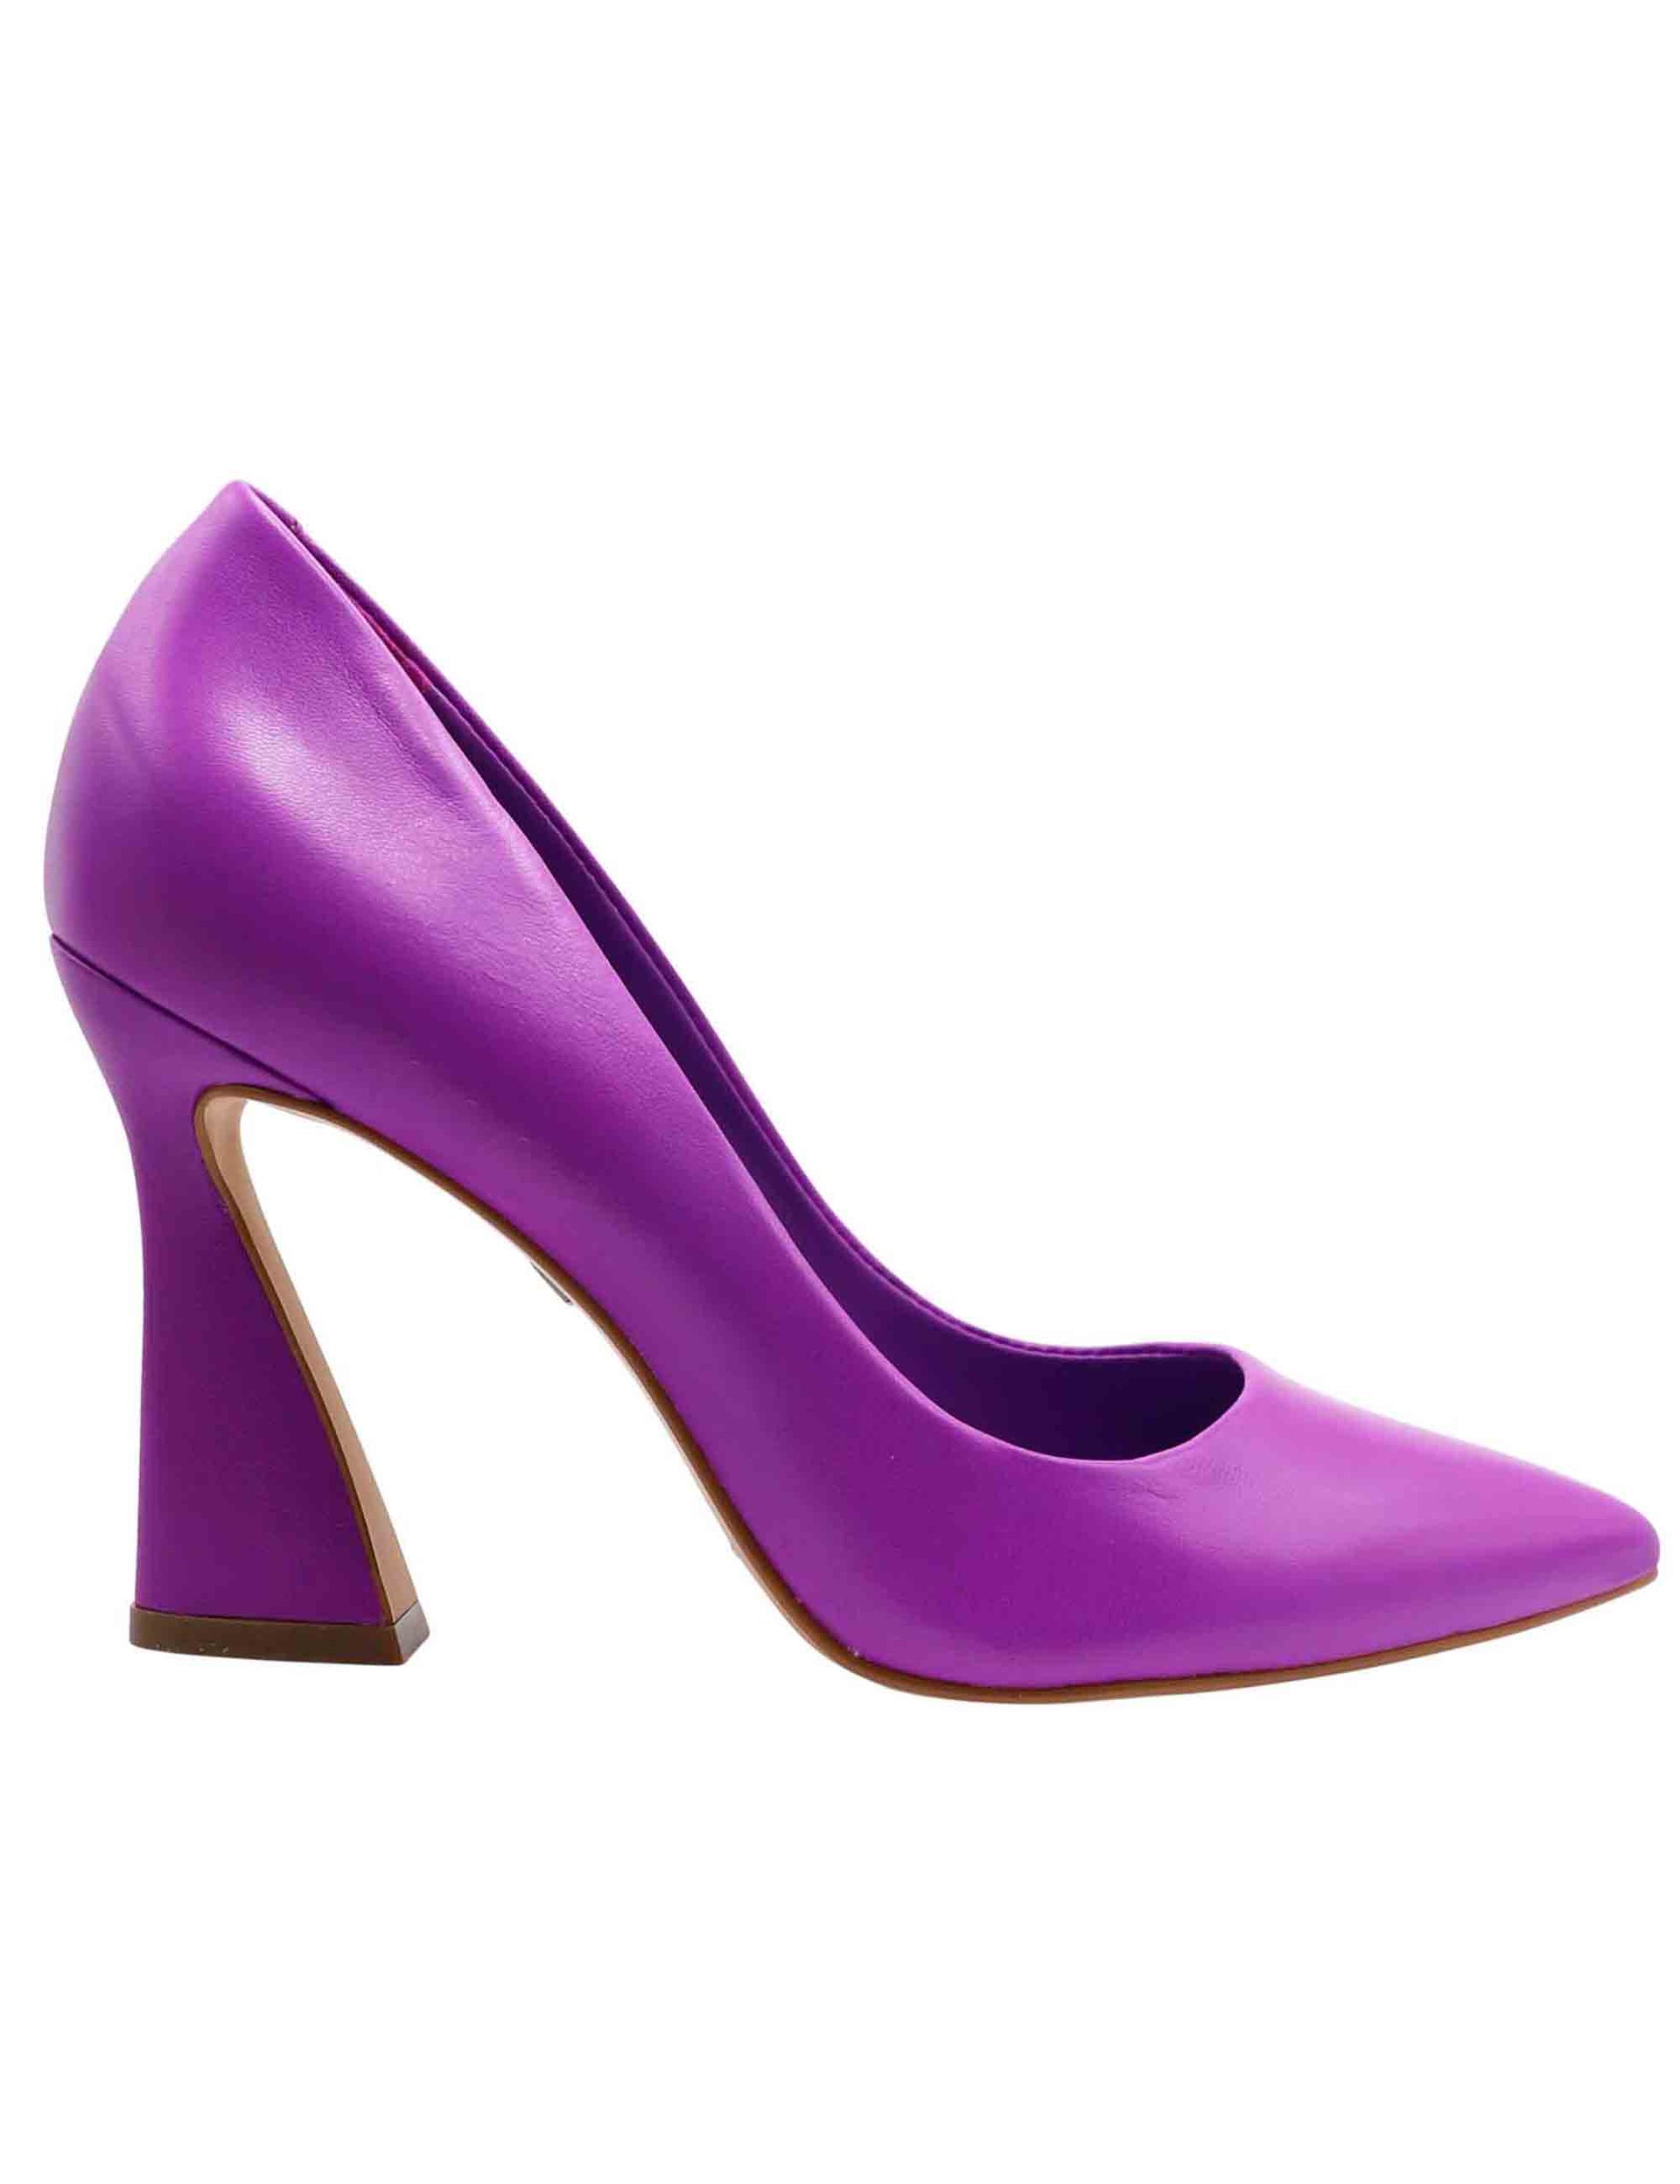 Women's pumps in purple leather with high heel and pointed toe